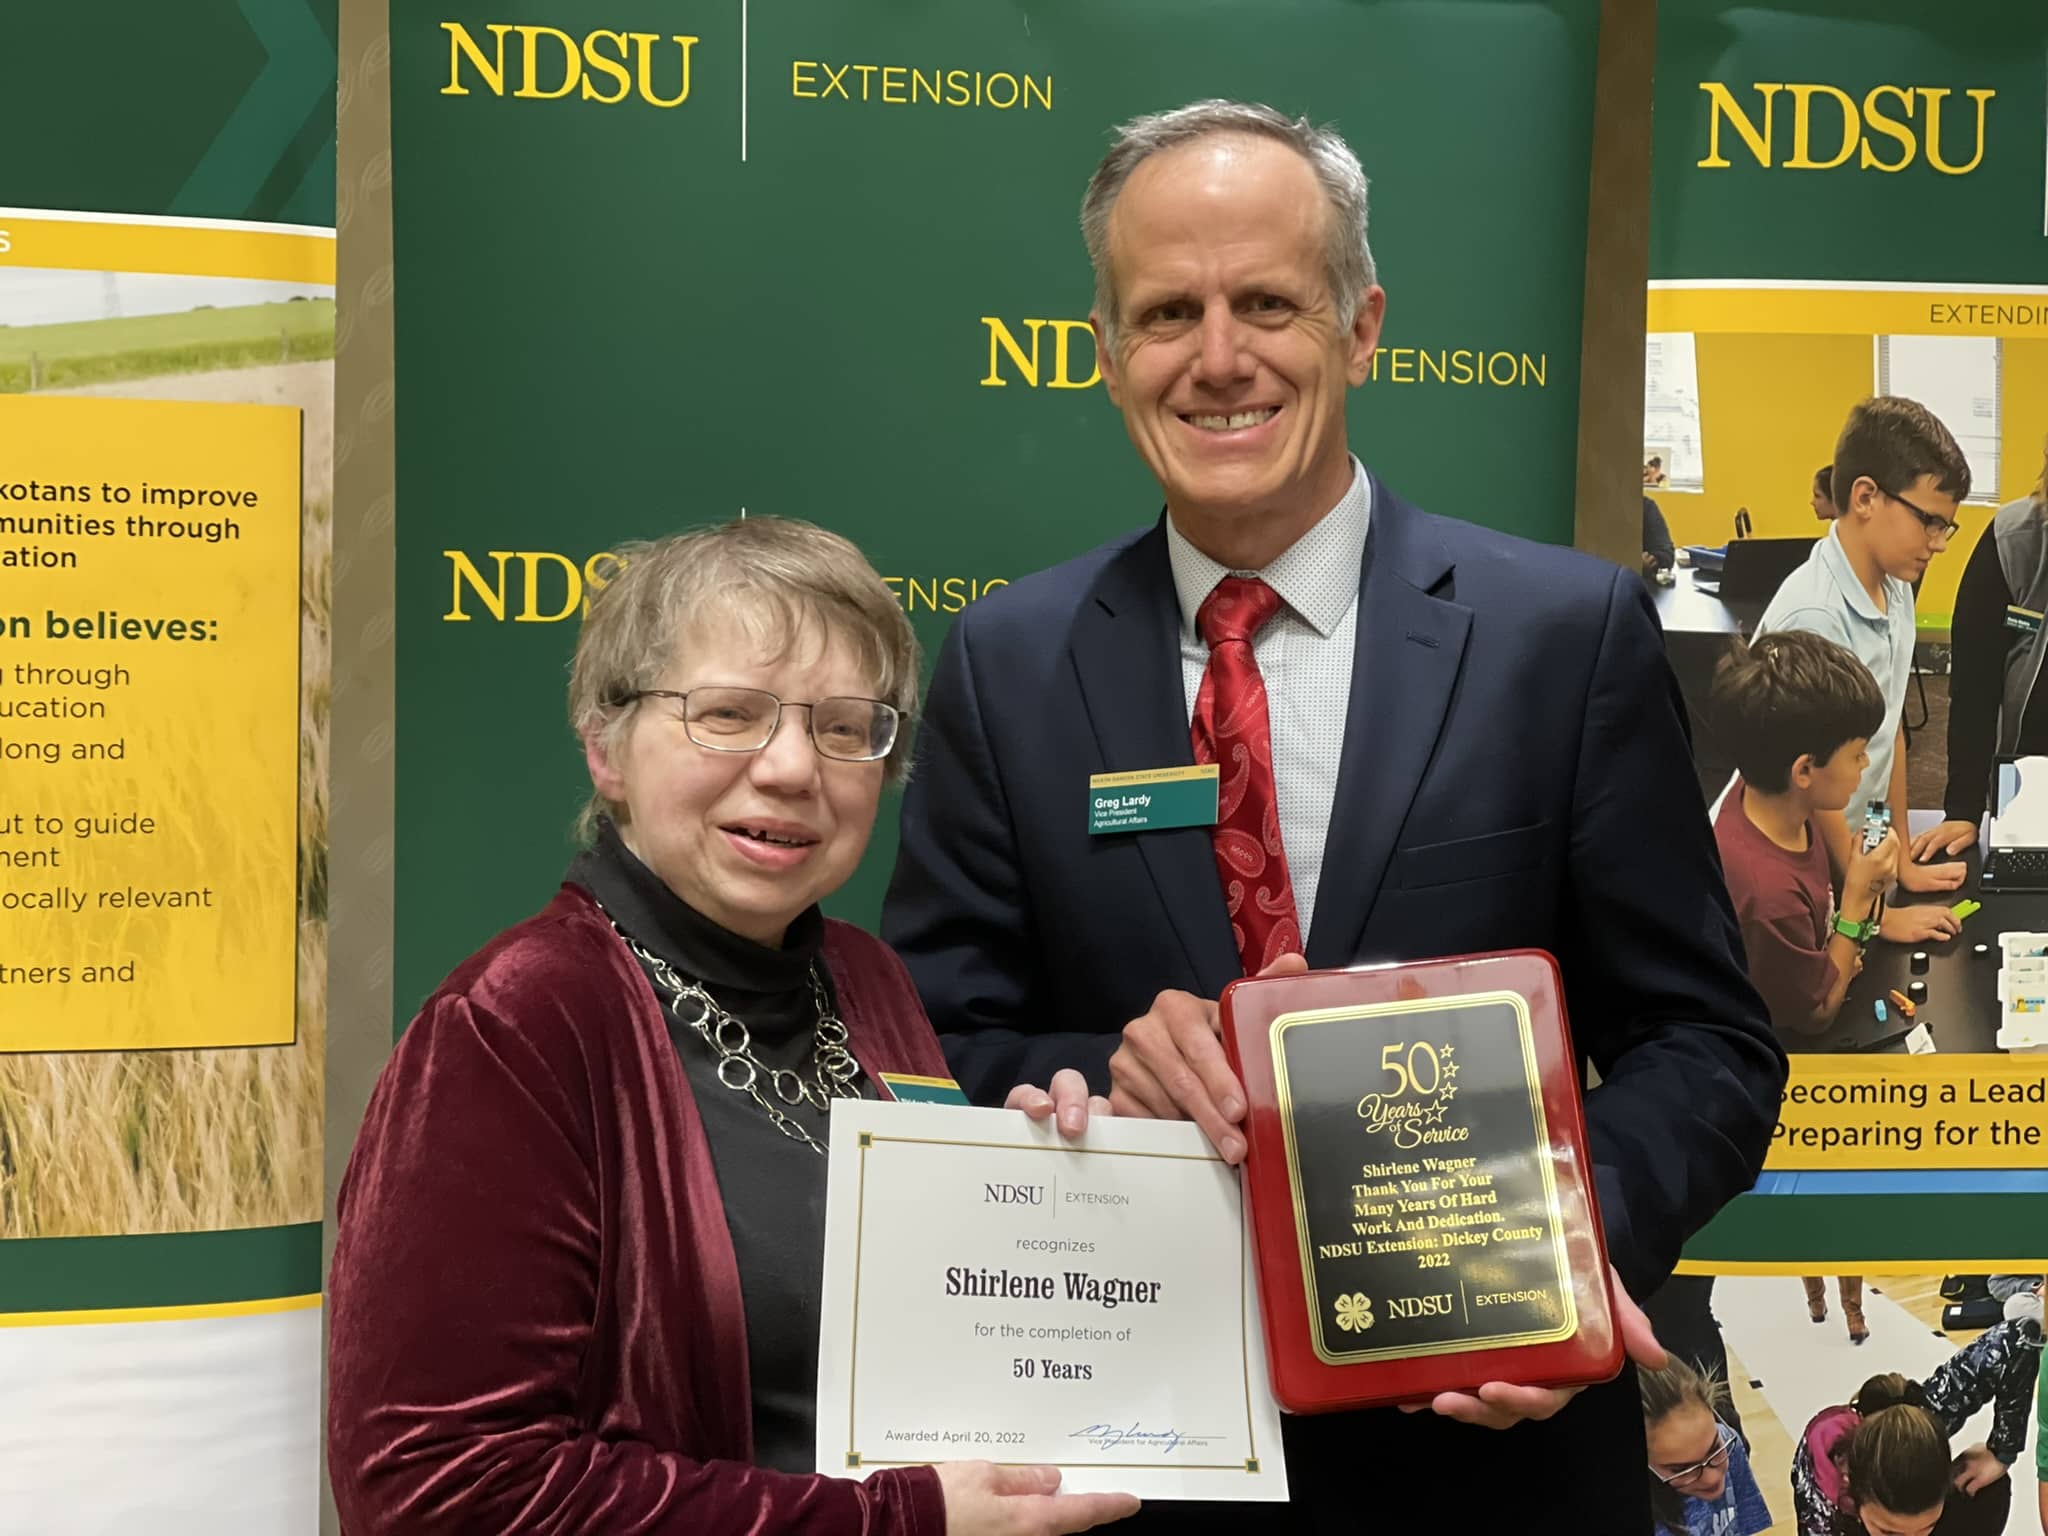 shirlene-wagner-dickey-county-is-honored-for-her-50-years-of-service-to-ndsu-extension-ndsu-photo